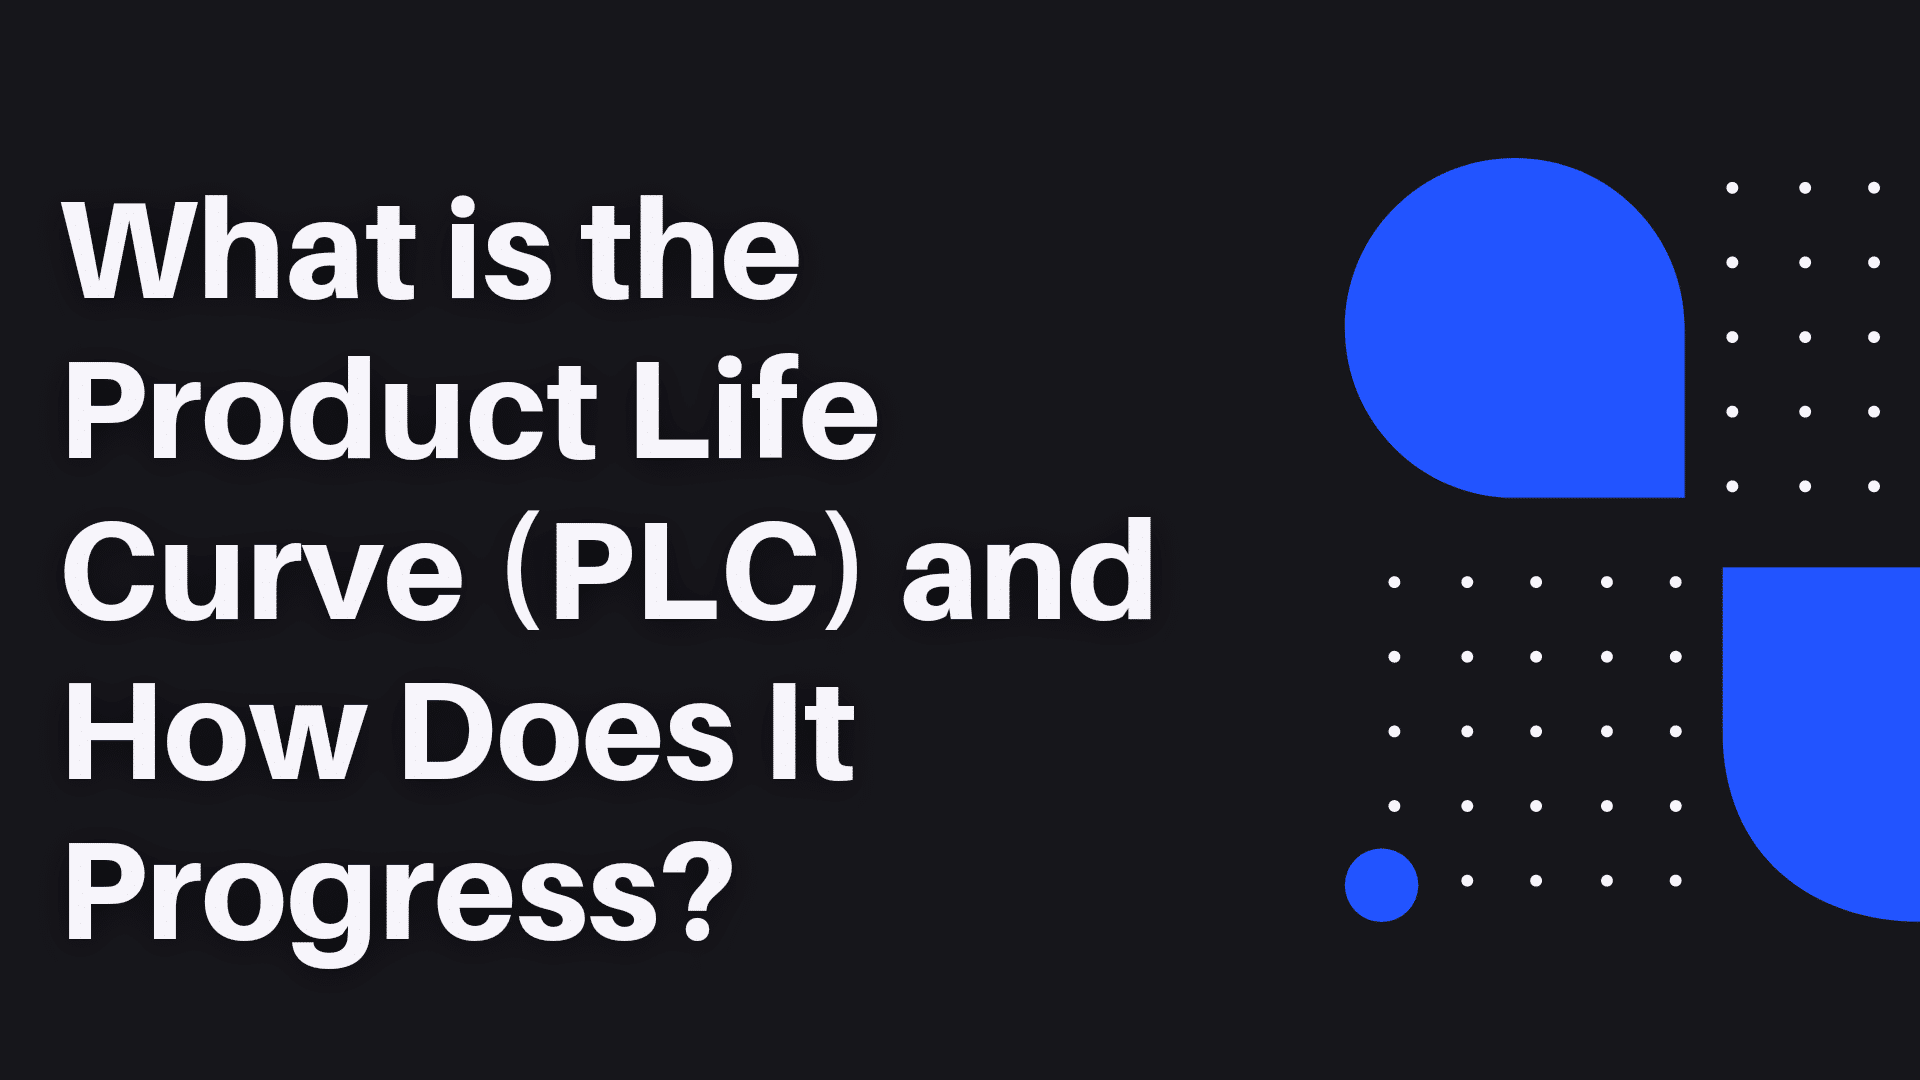 What is the Product Life Curve (PLC) and How Does It Progress